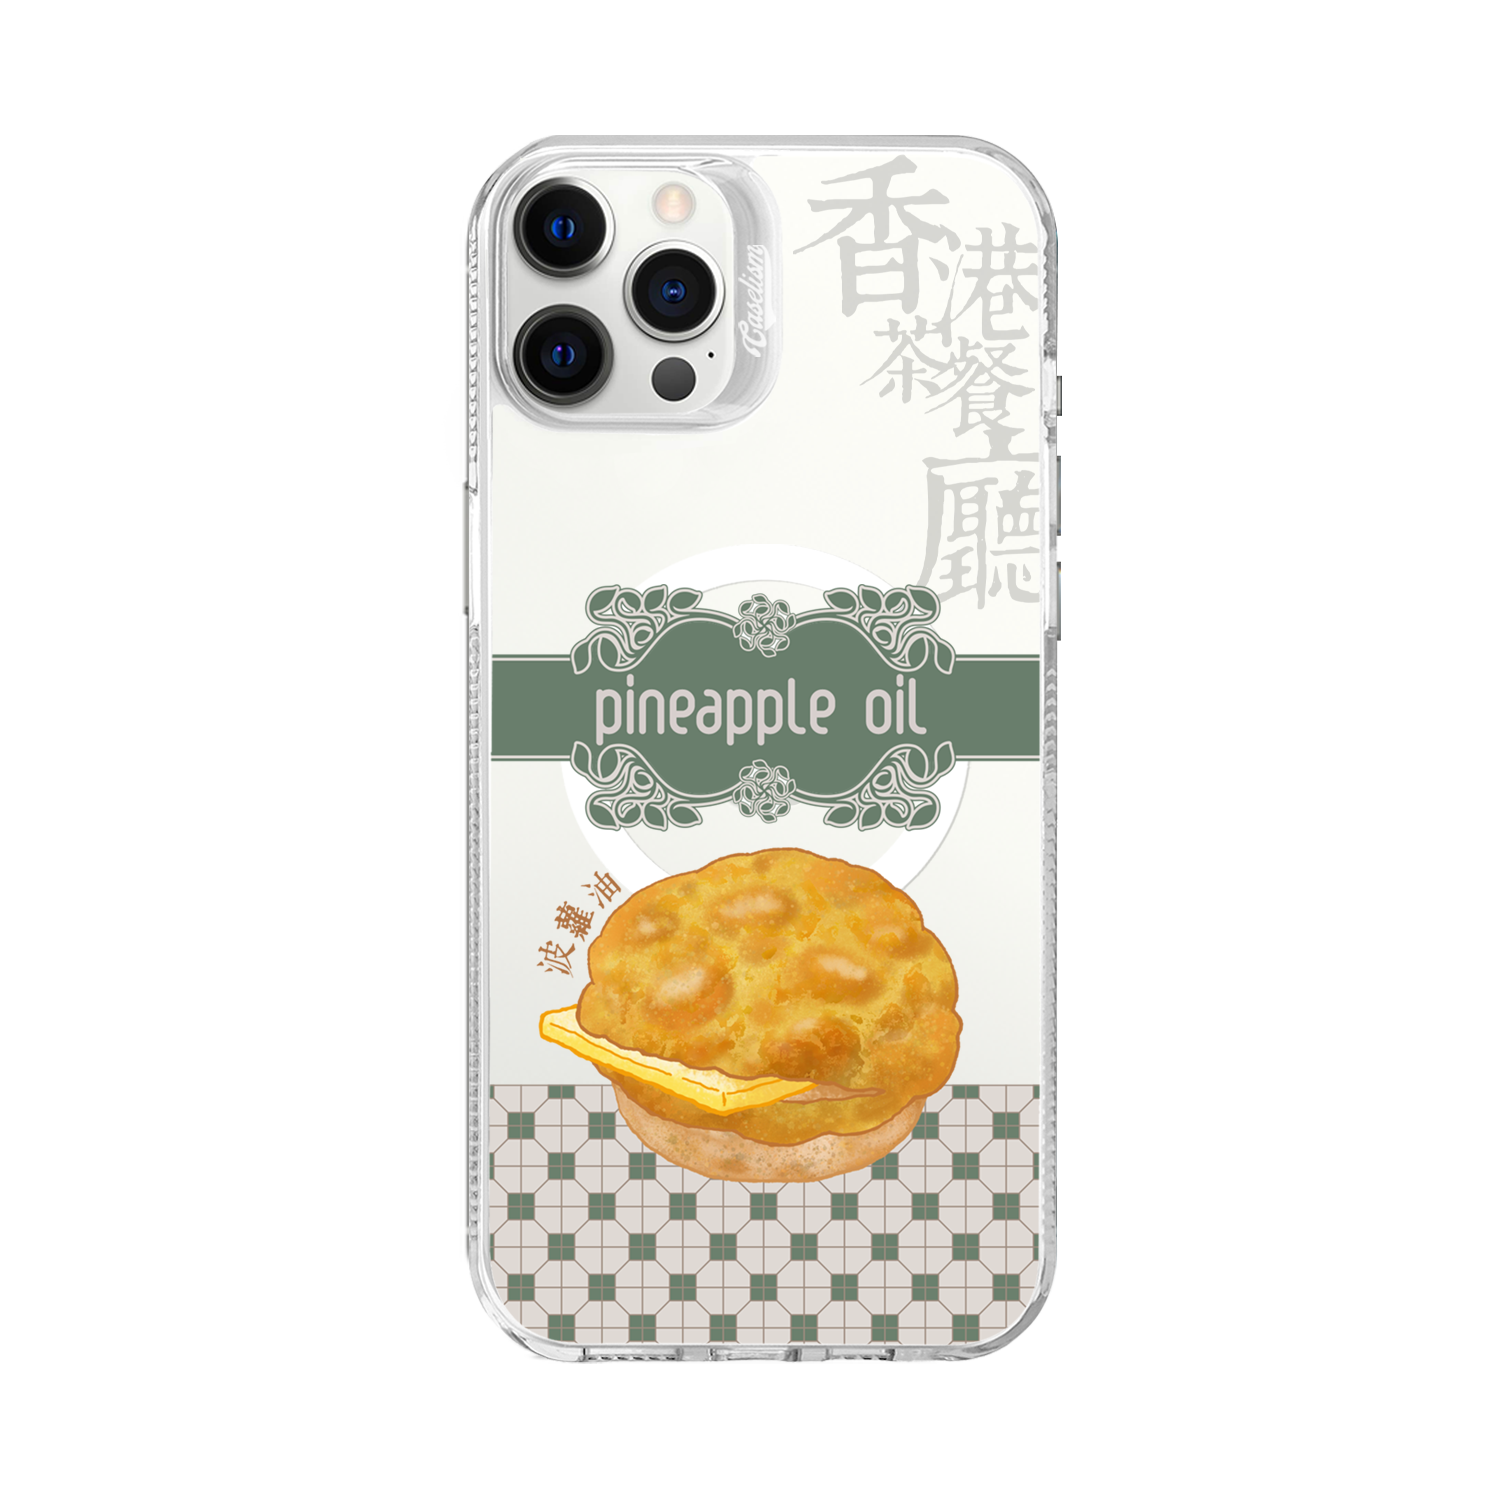 CAFE003 - ColorLite Case for iPhone